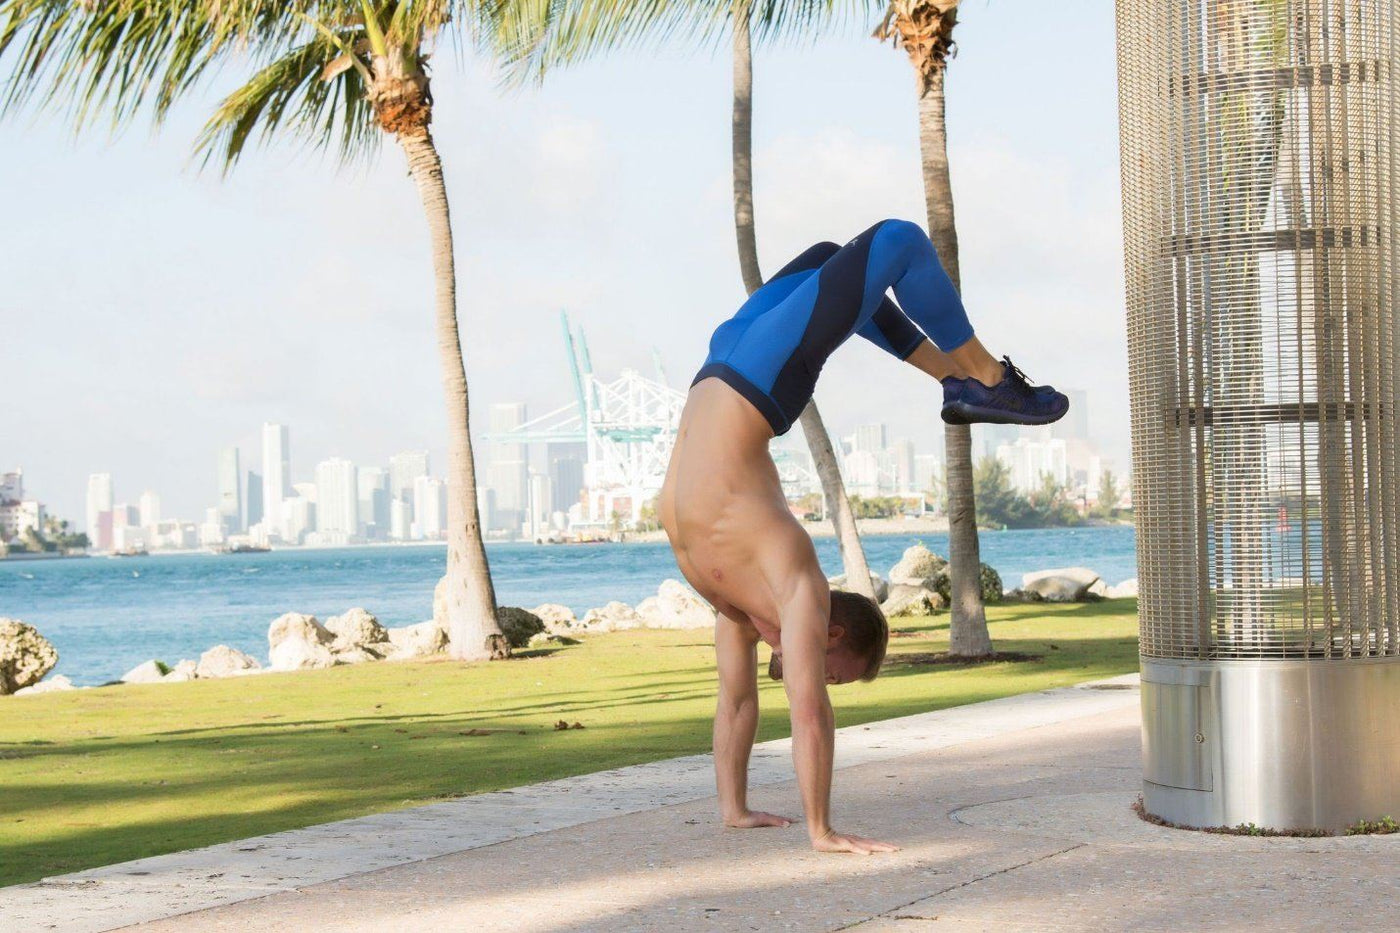 Man performing handstand with river and skyline in background